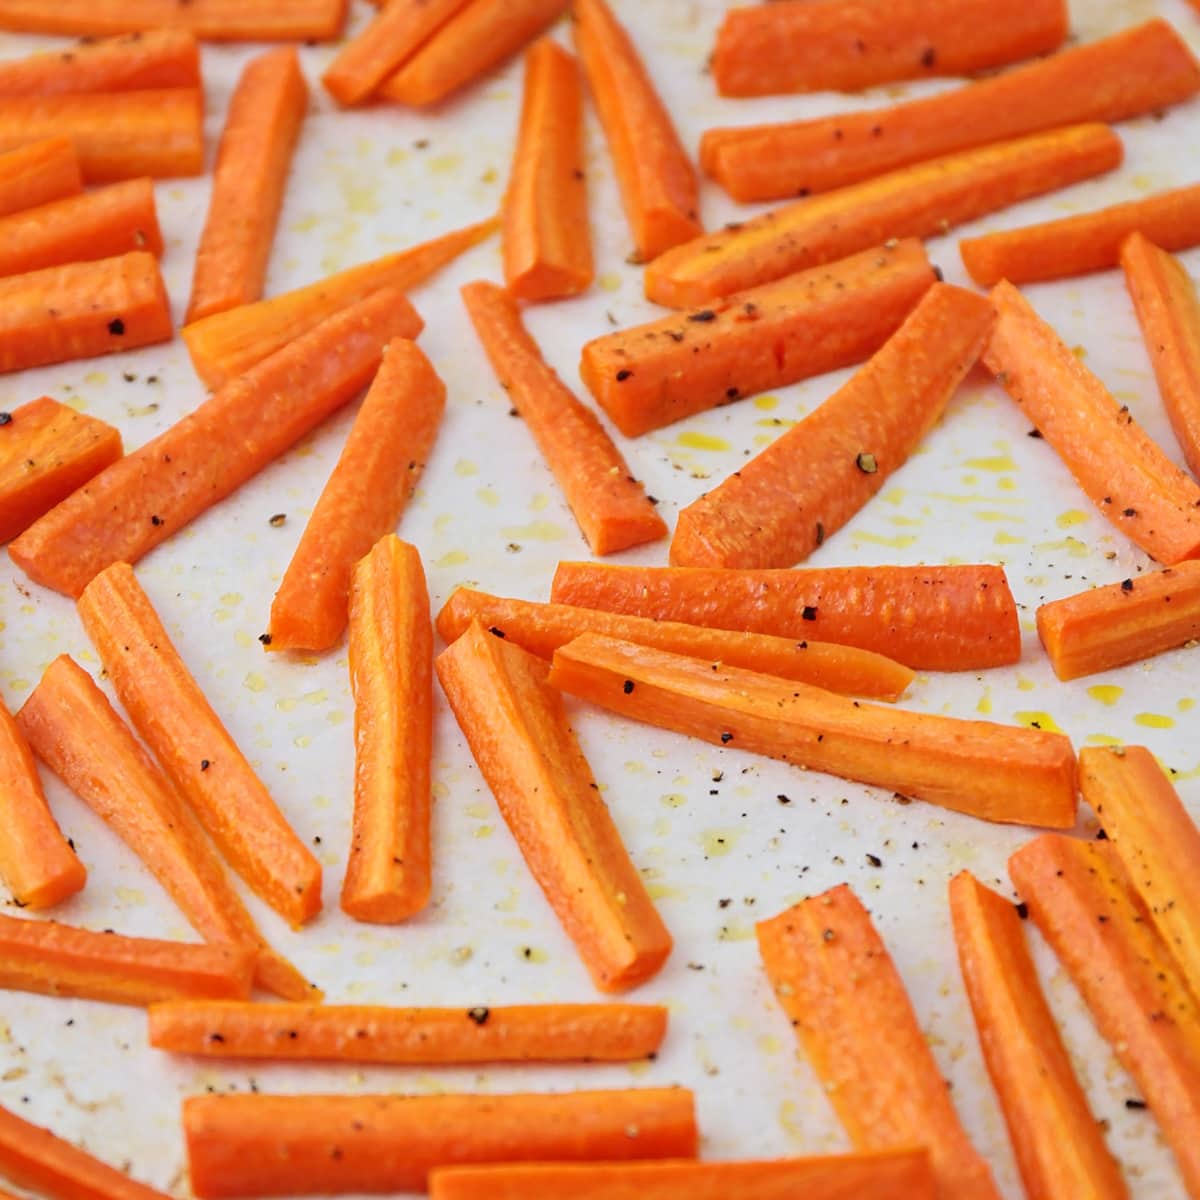 Carrots sticks coated with olive oil and seasoning, spread on a baking sheet.